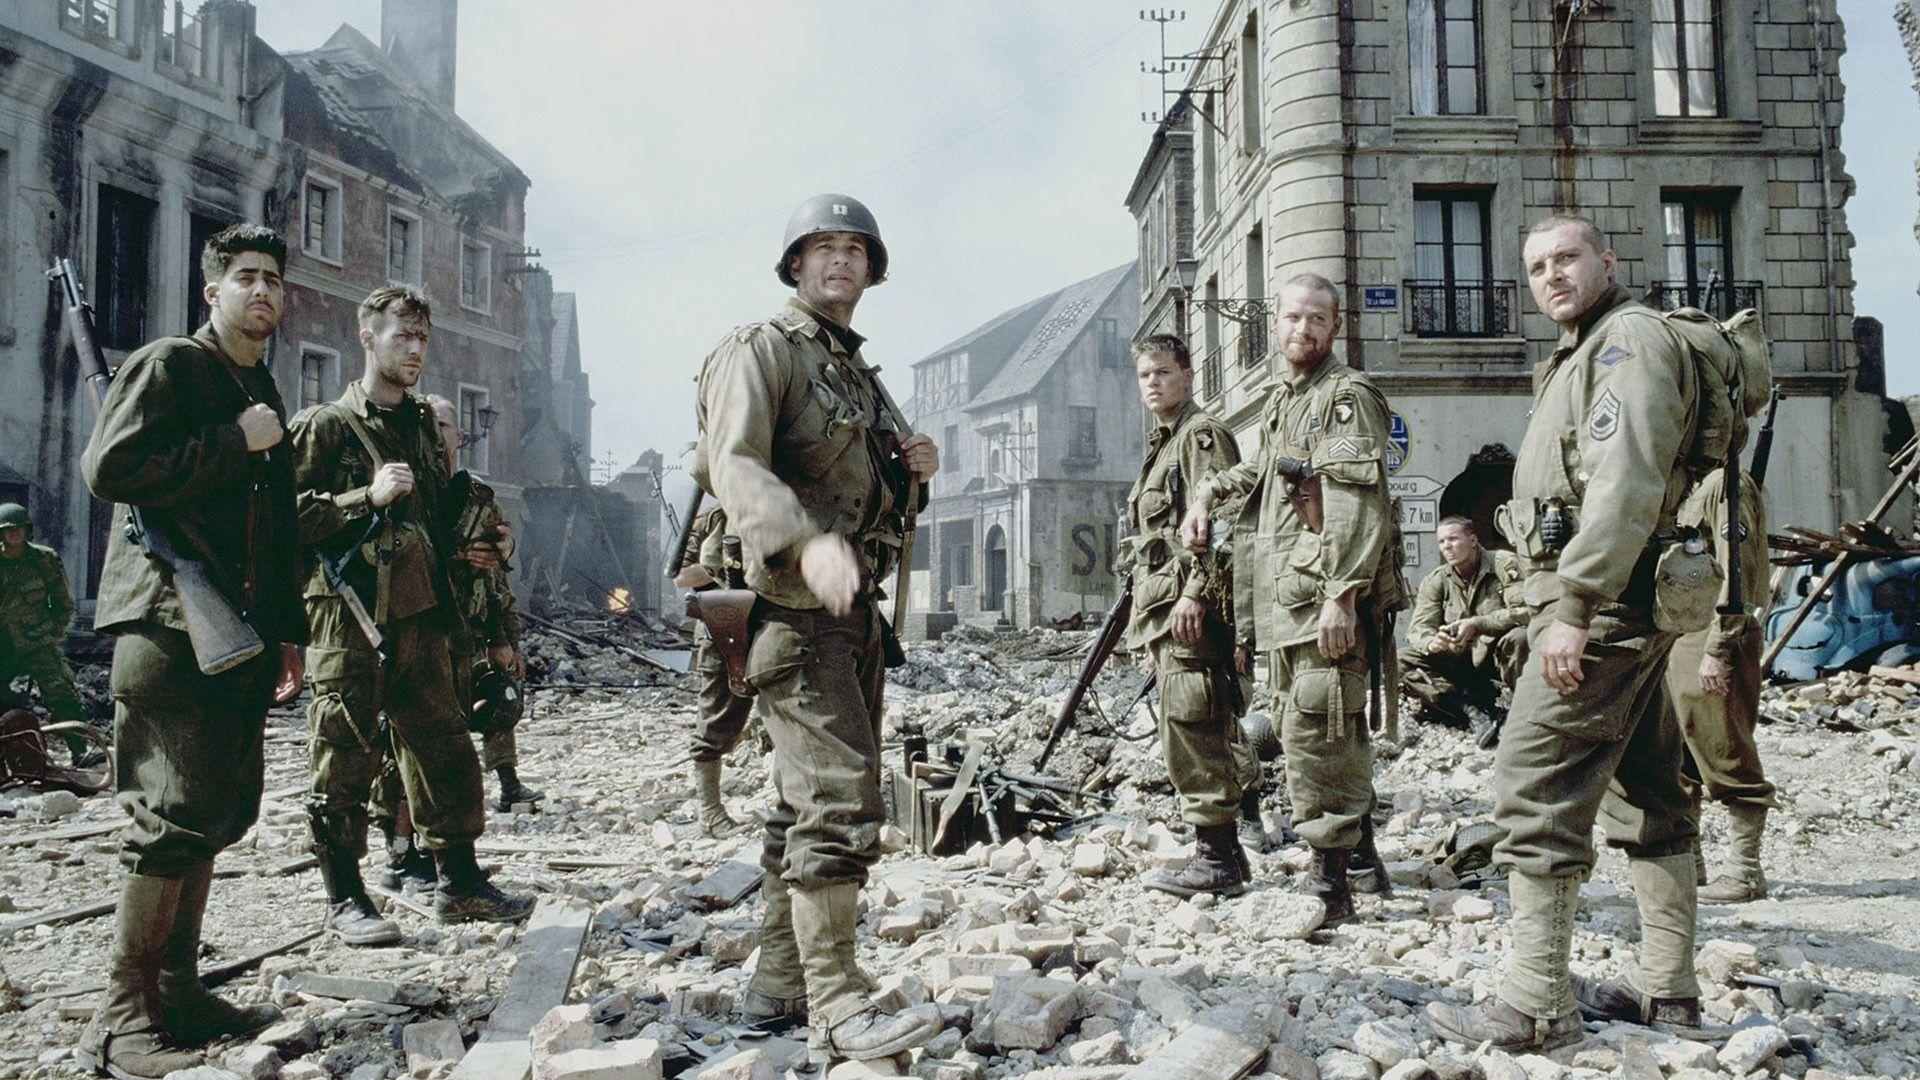 The main characters of the movie Saving Private Ryan in the streets of a destroyed city